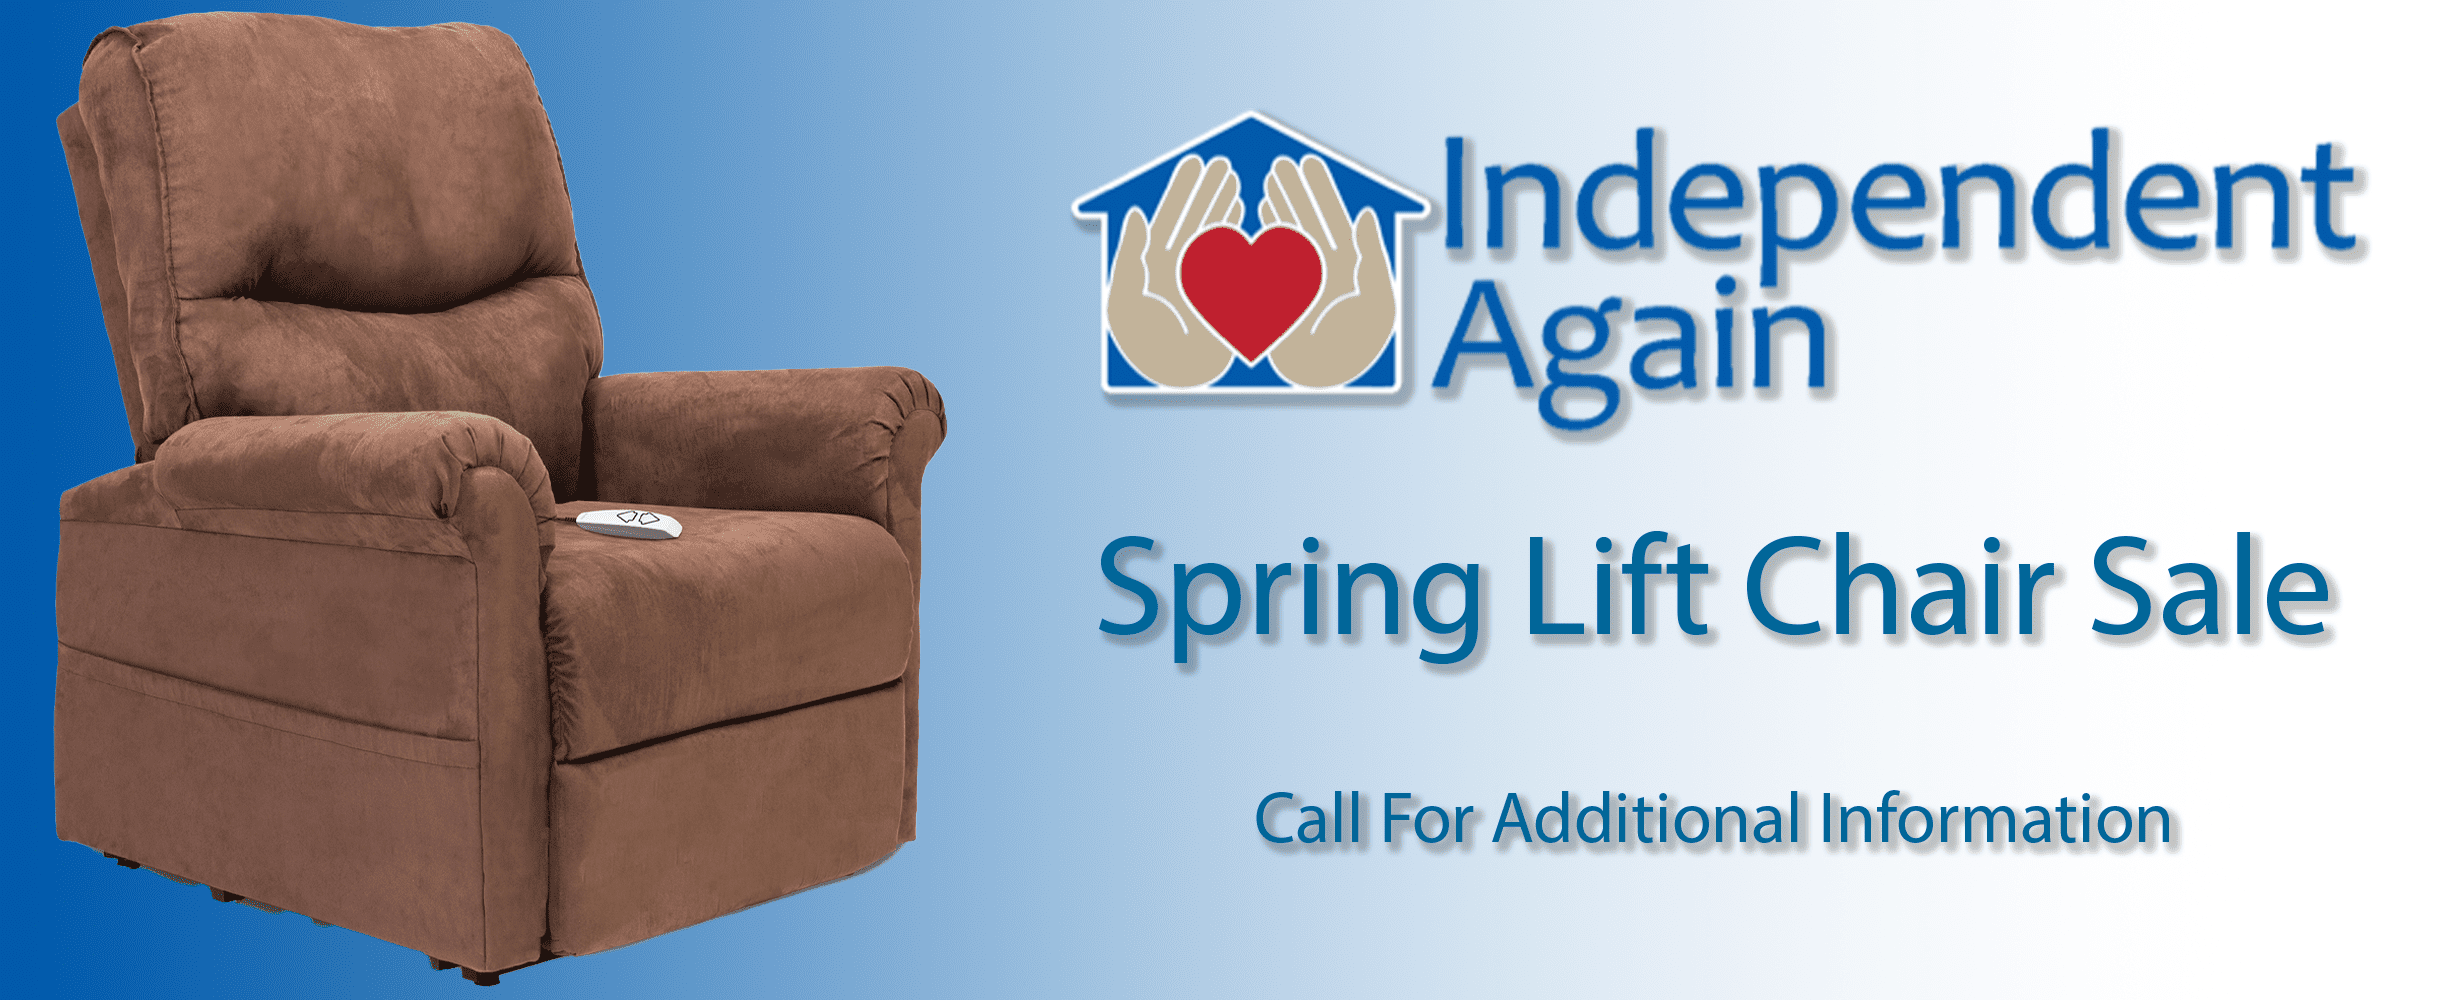 Spring Lift Chair Sale